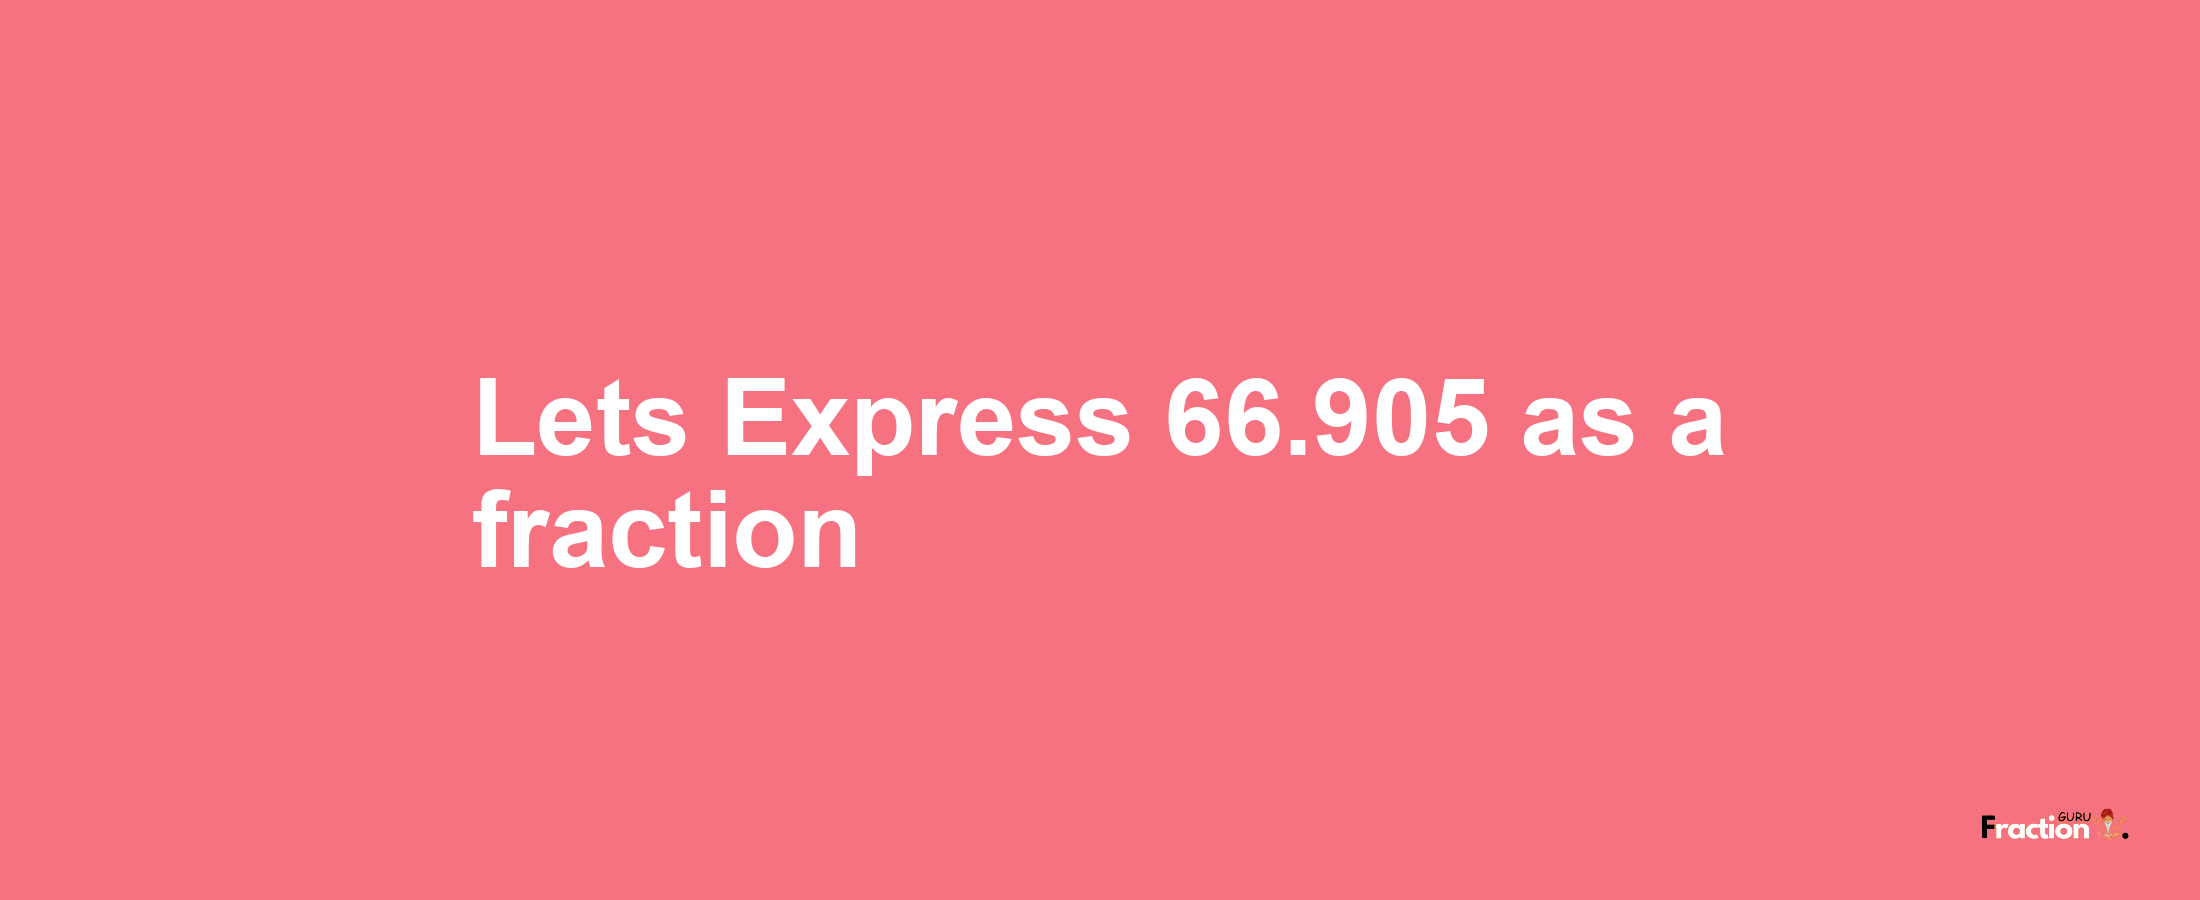 Lets Express 66.905 as afraction